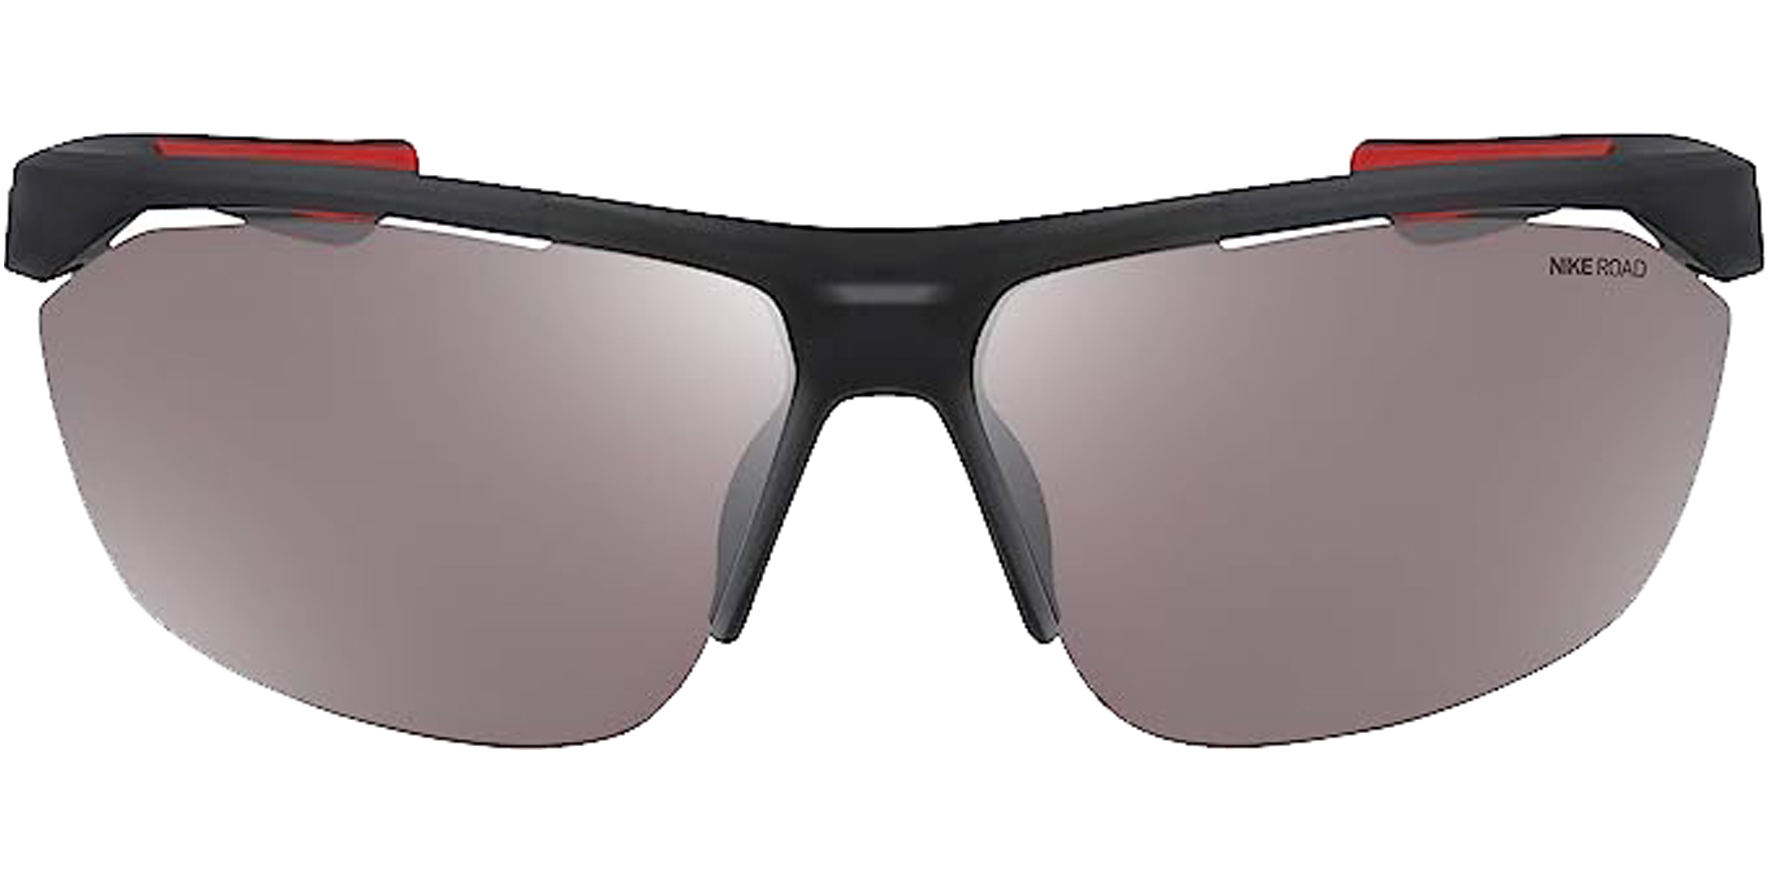 Share more than 151 tailwind sunglasses best